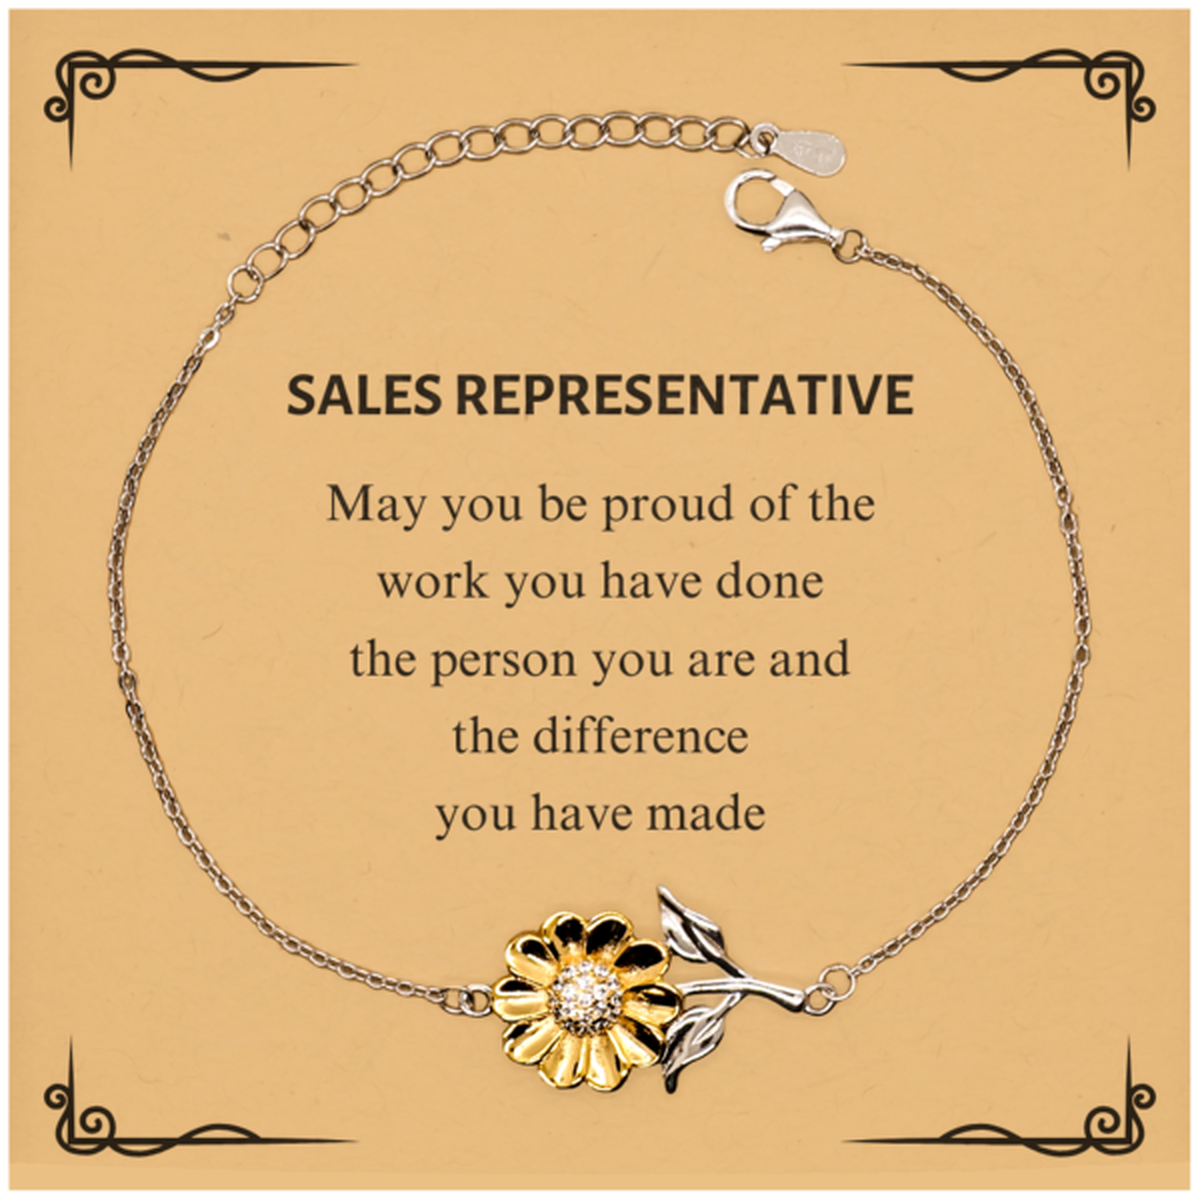 Sales Representative May you be proud of the work you have done, Retirement Sales Representative Sunflower Bracelet for Colleague Appreciation Gifts Amazing for Sales Representative